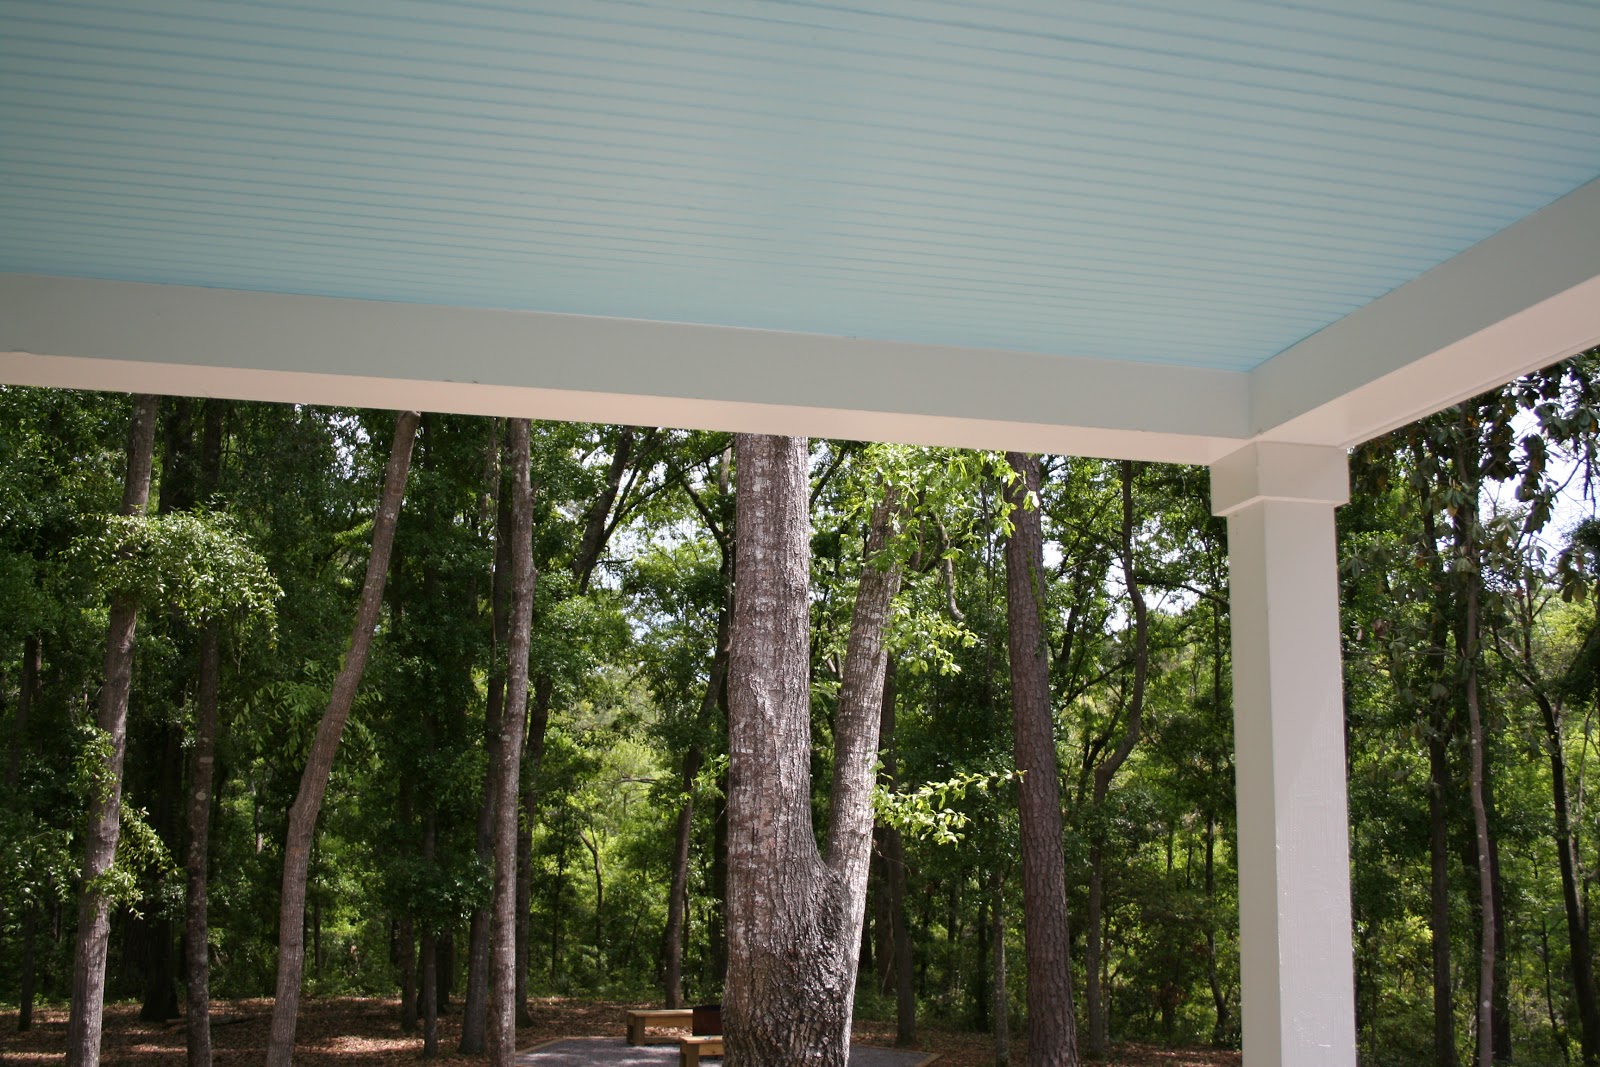 The Lowcountry Lady Painting The Porch Ceiling Blue